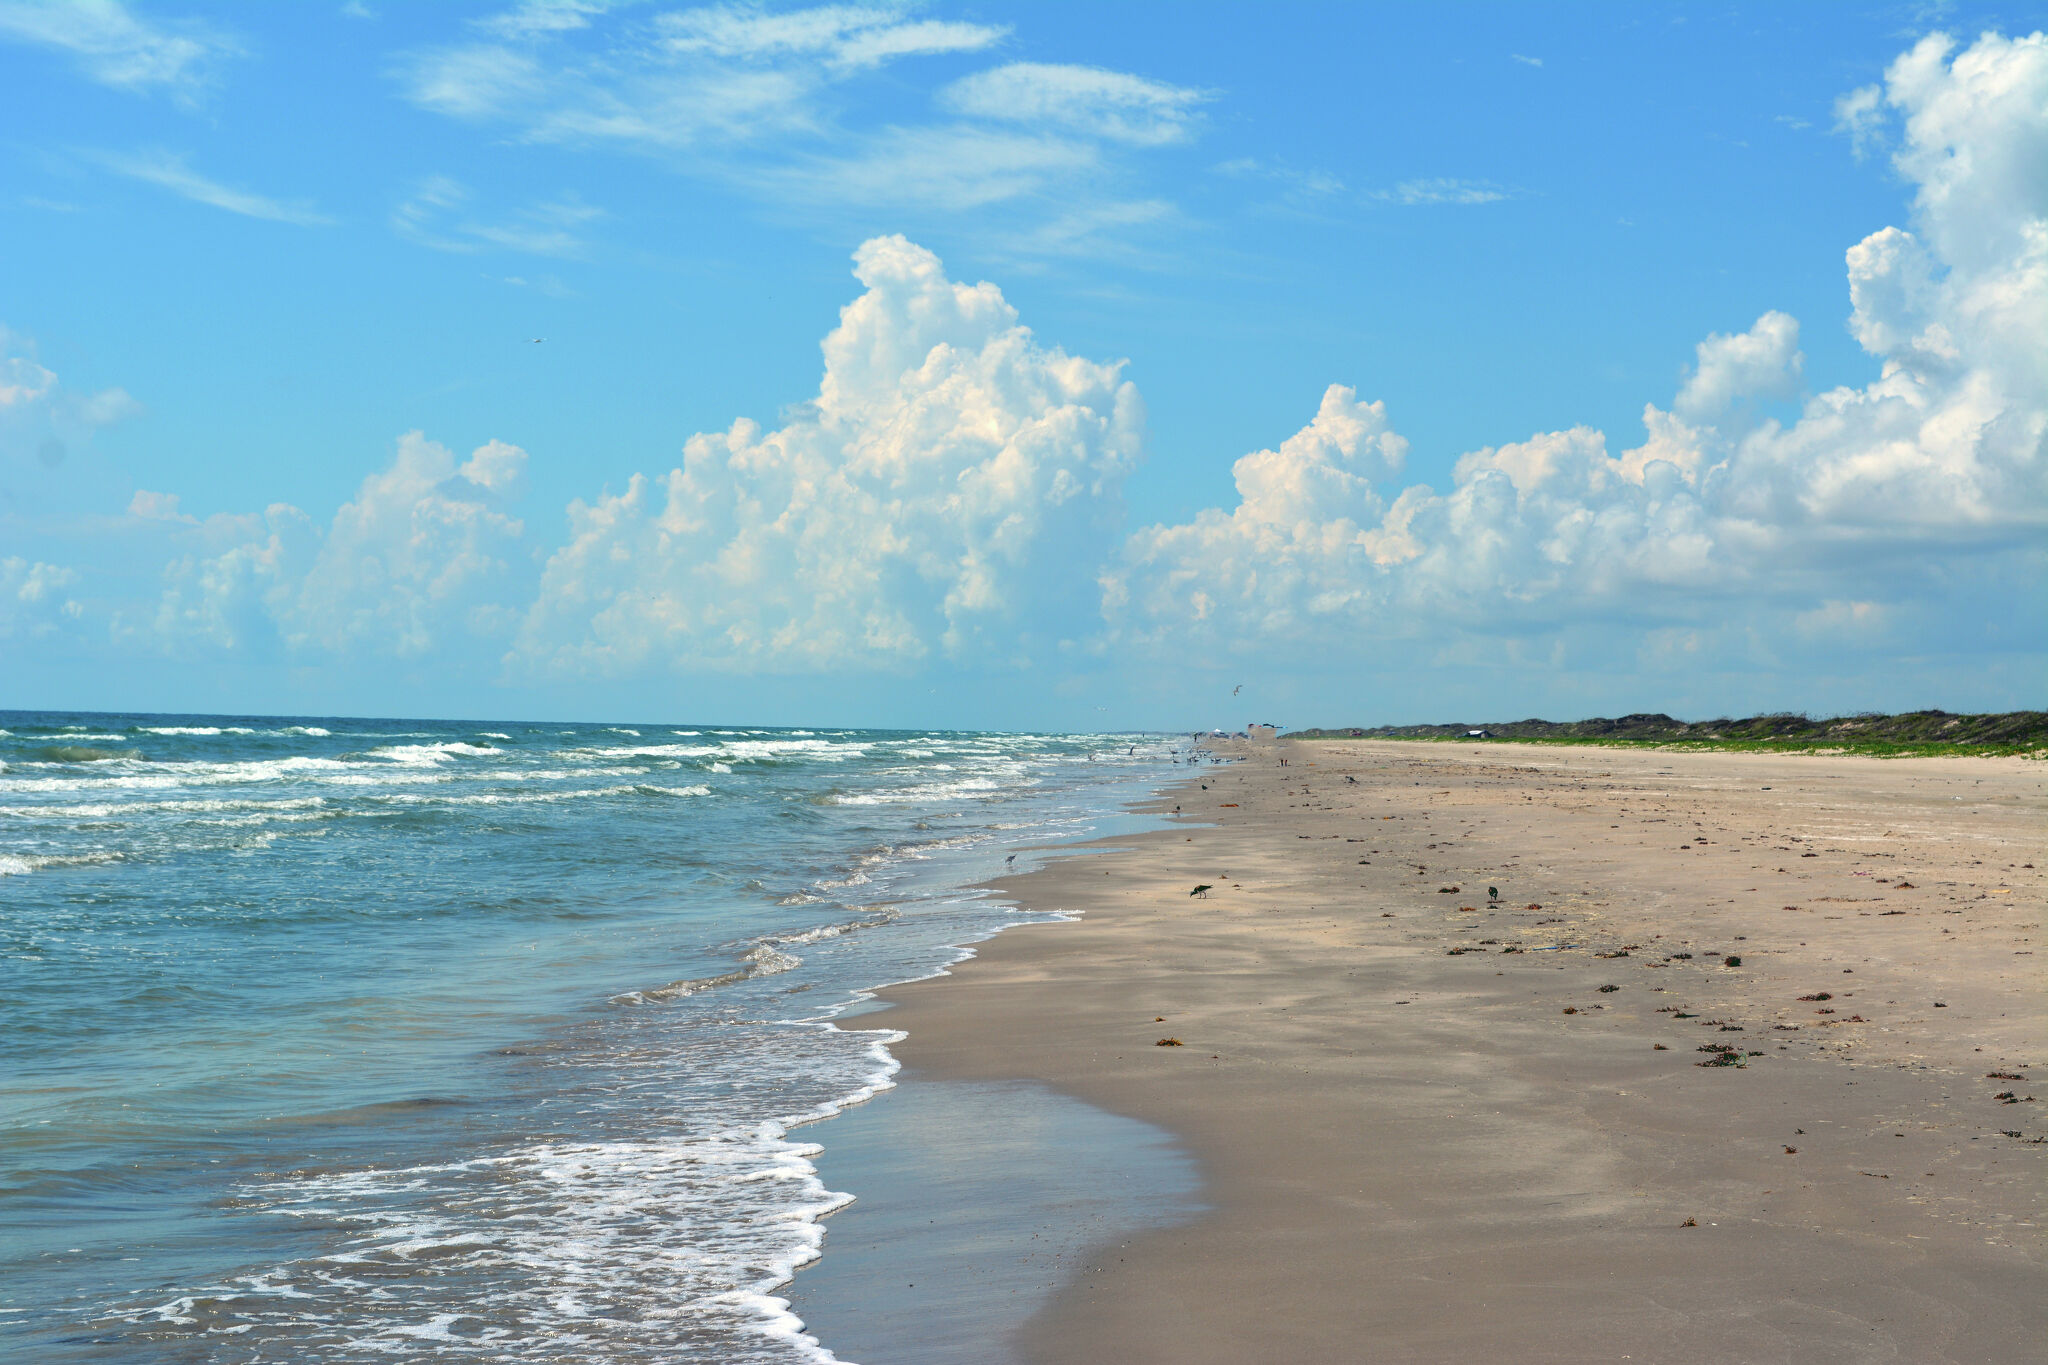 Best . beaches: Texas location named a top travel destination